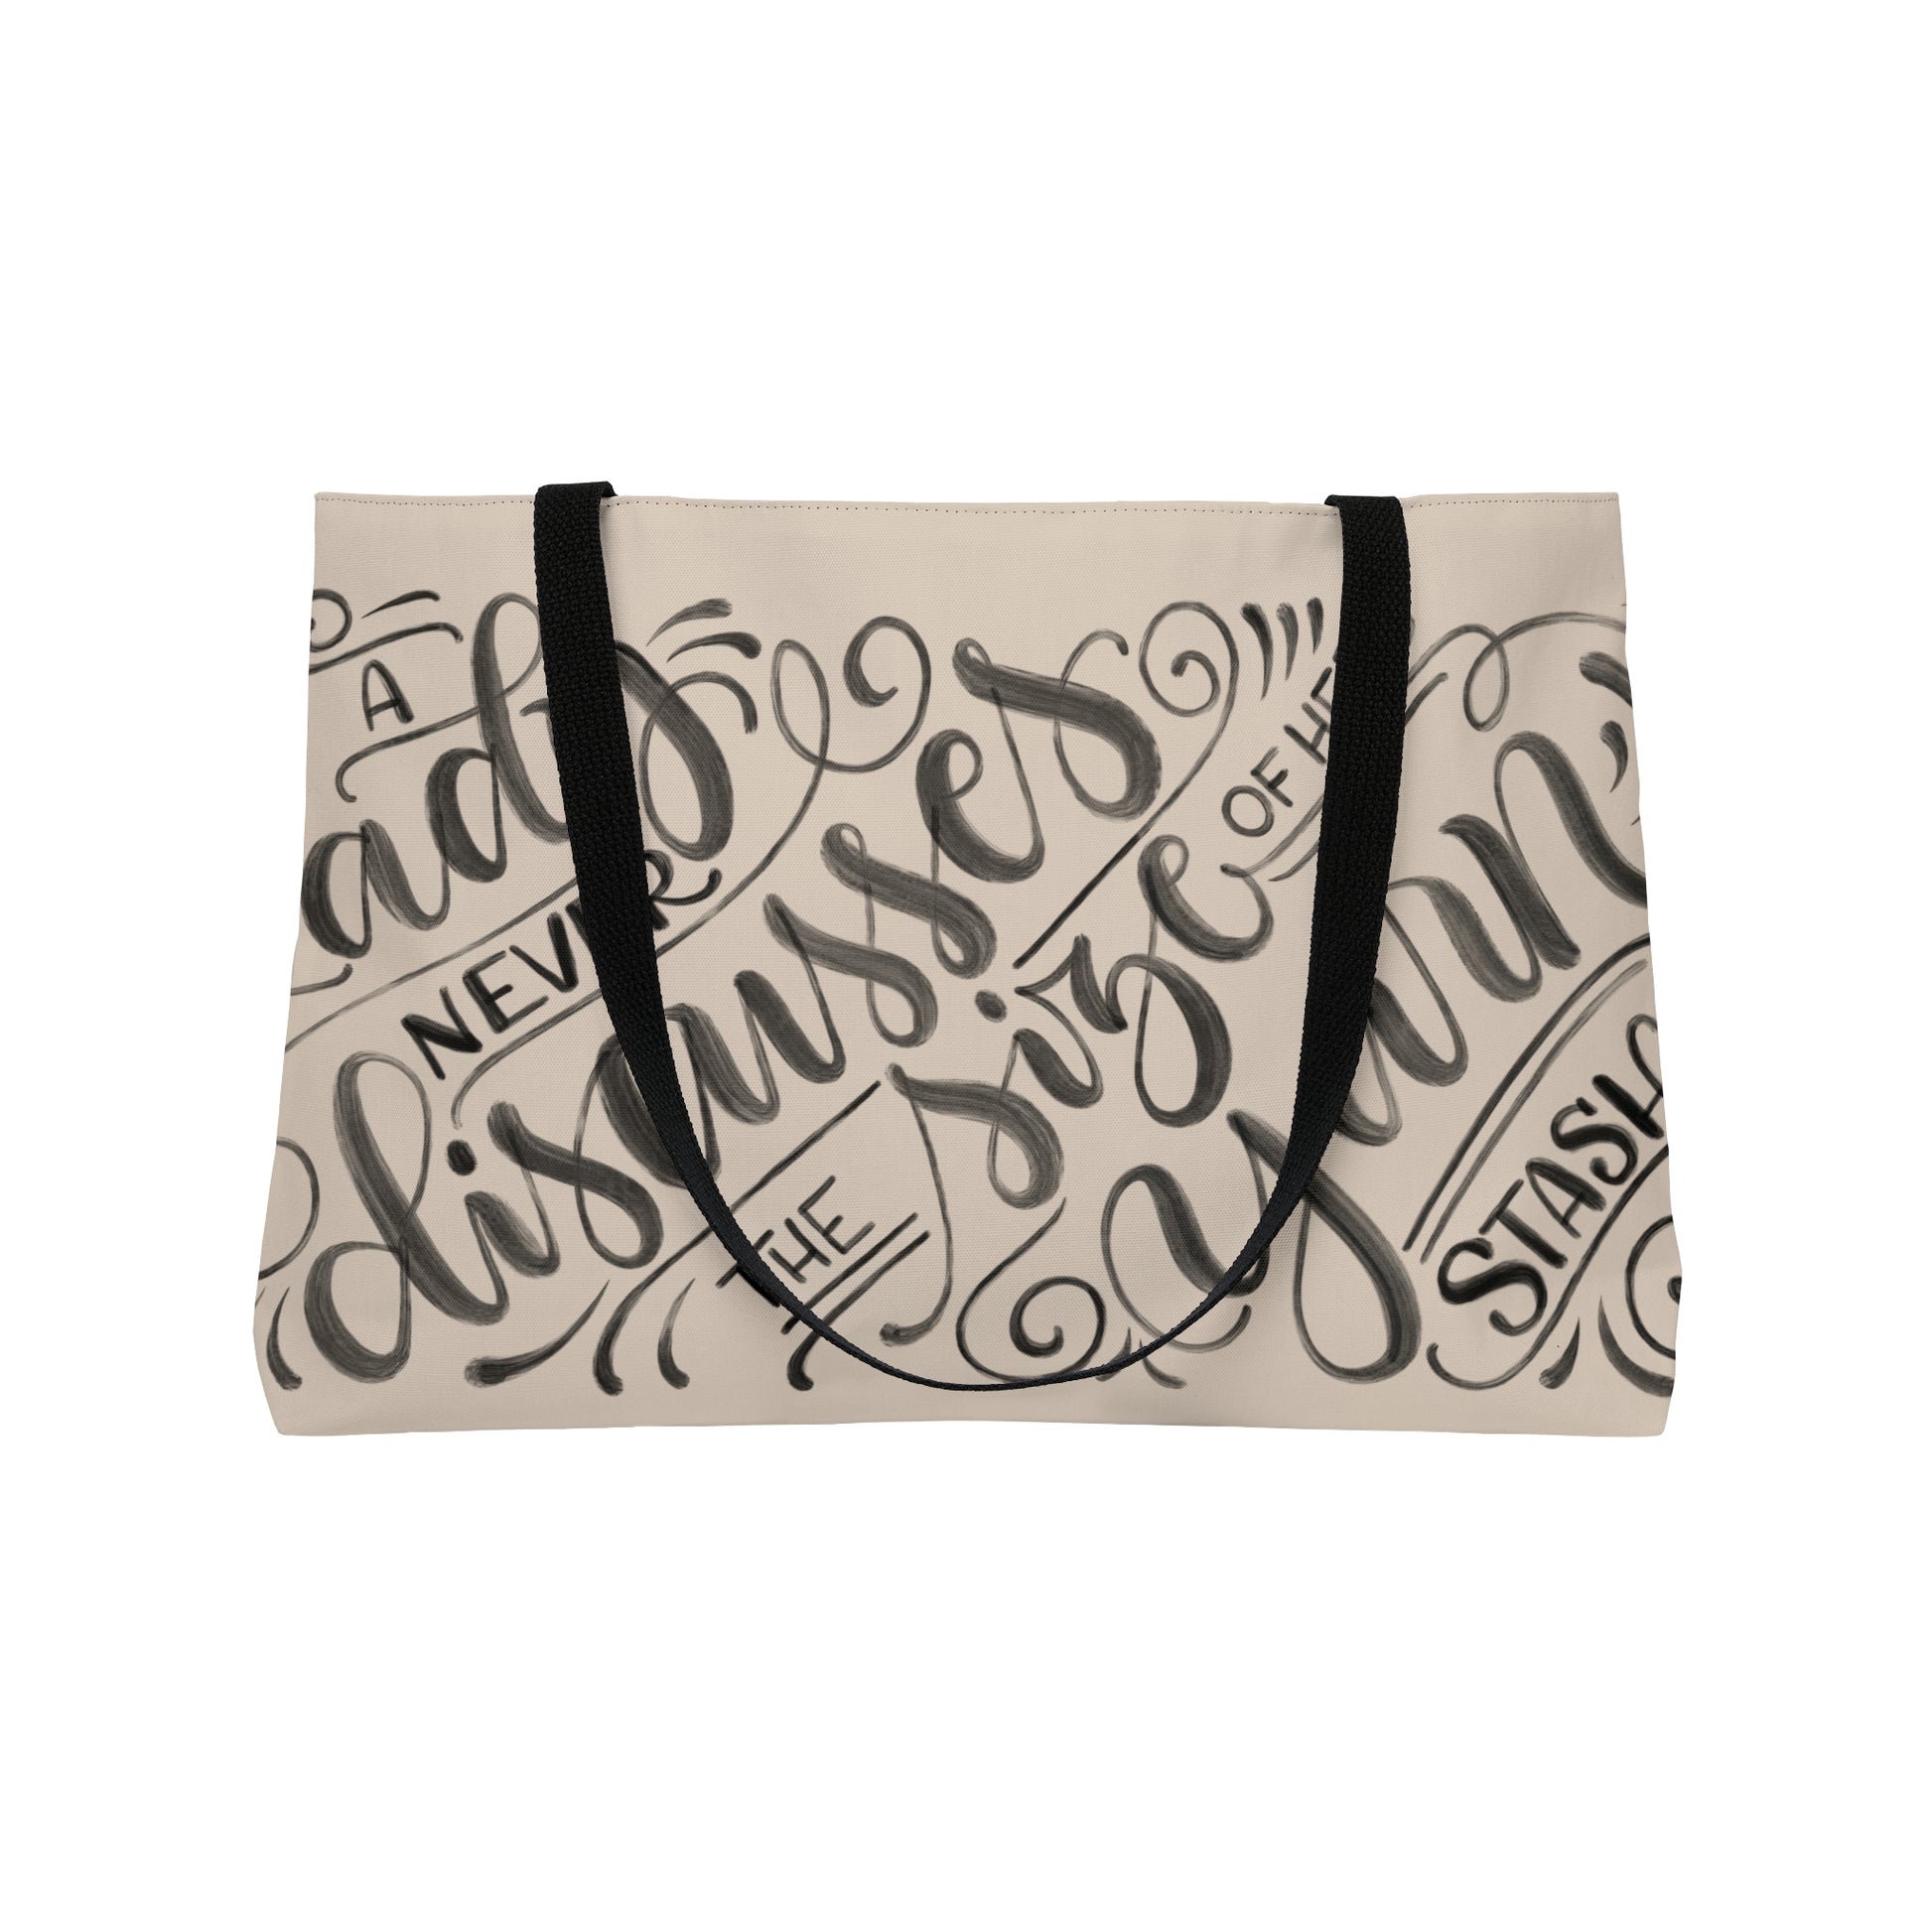 A lady never discusses the size of her yarn stash - Tan Weekender Tote Bag - howjoyfulshop